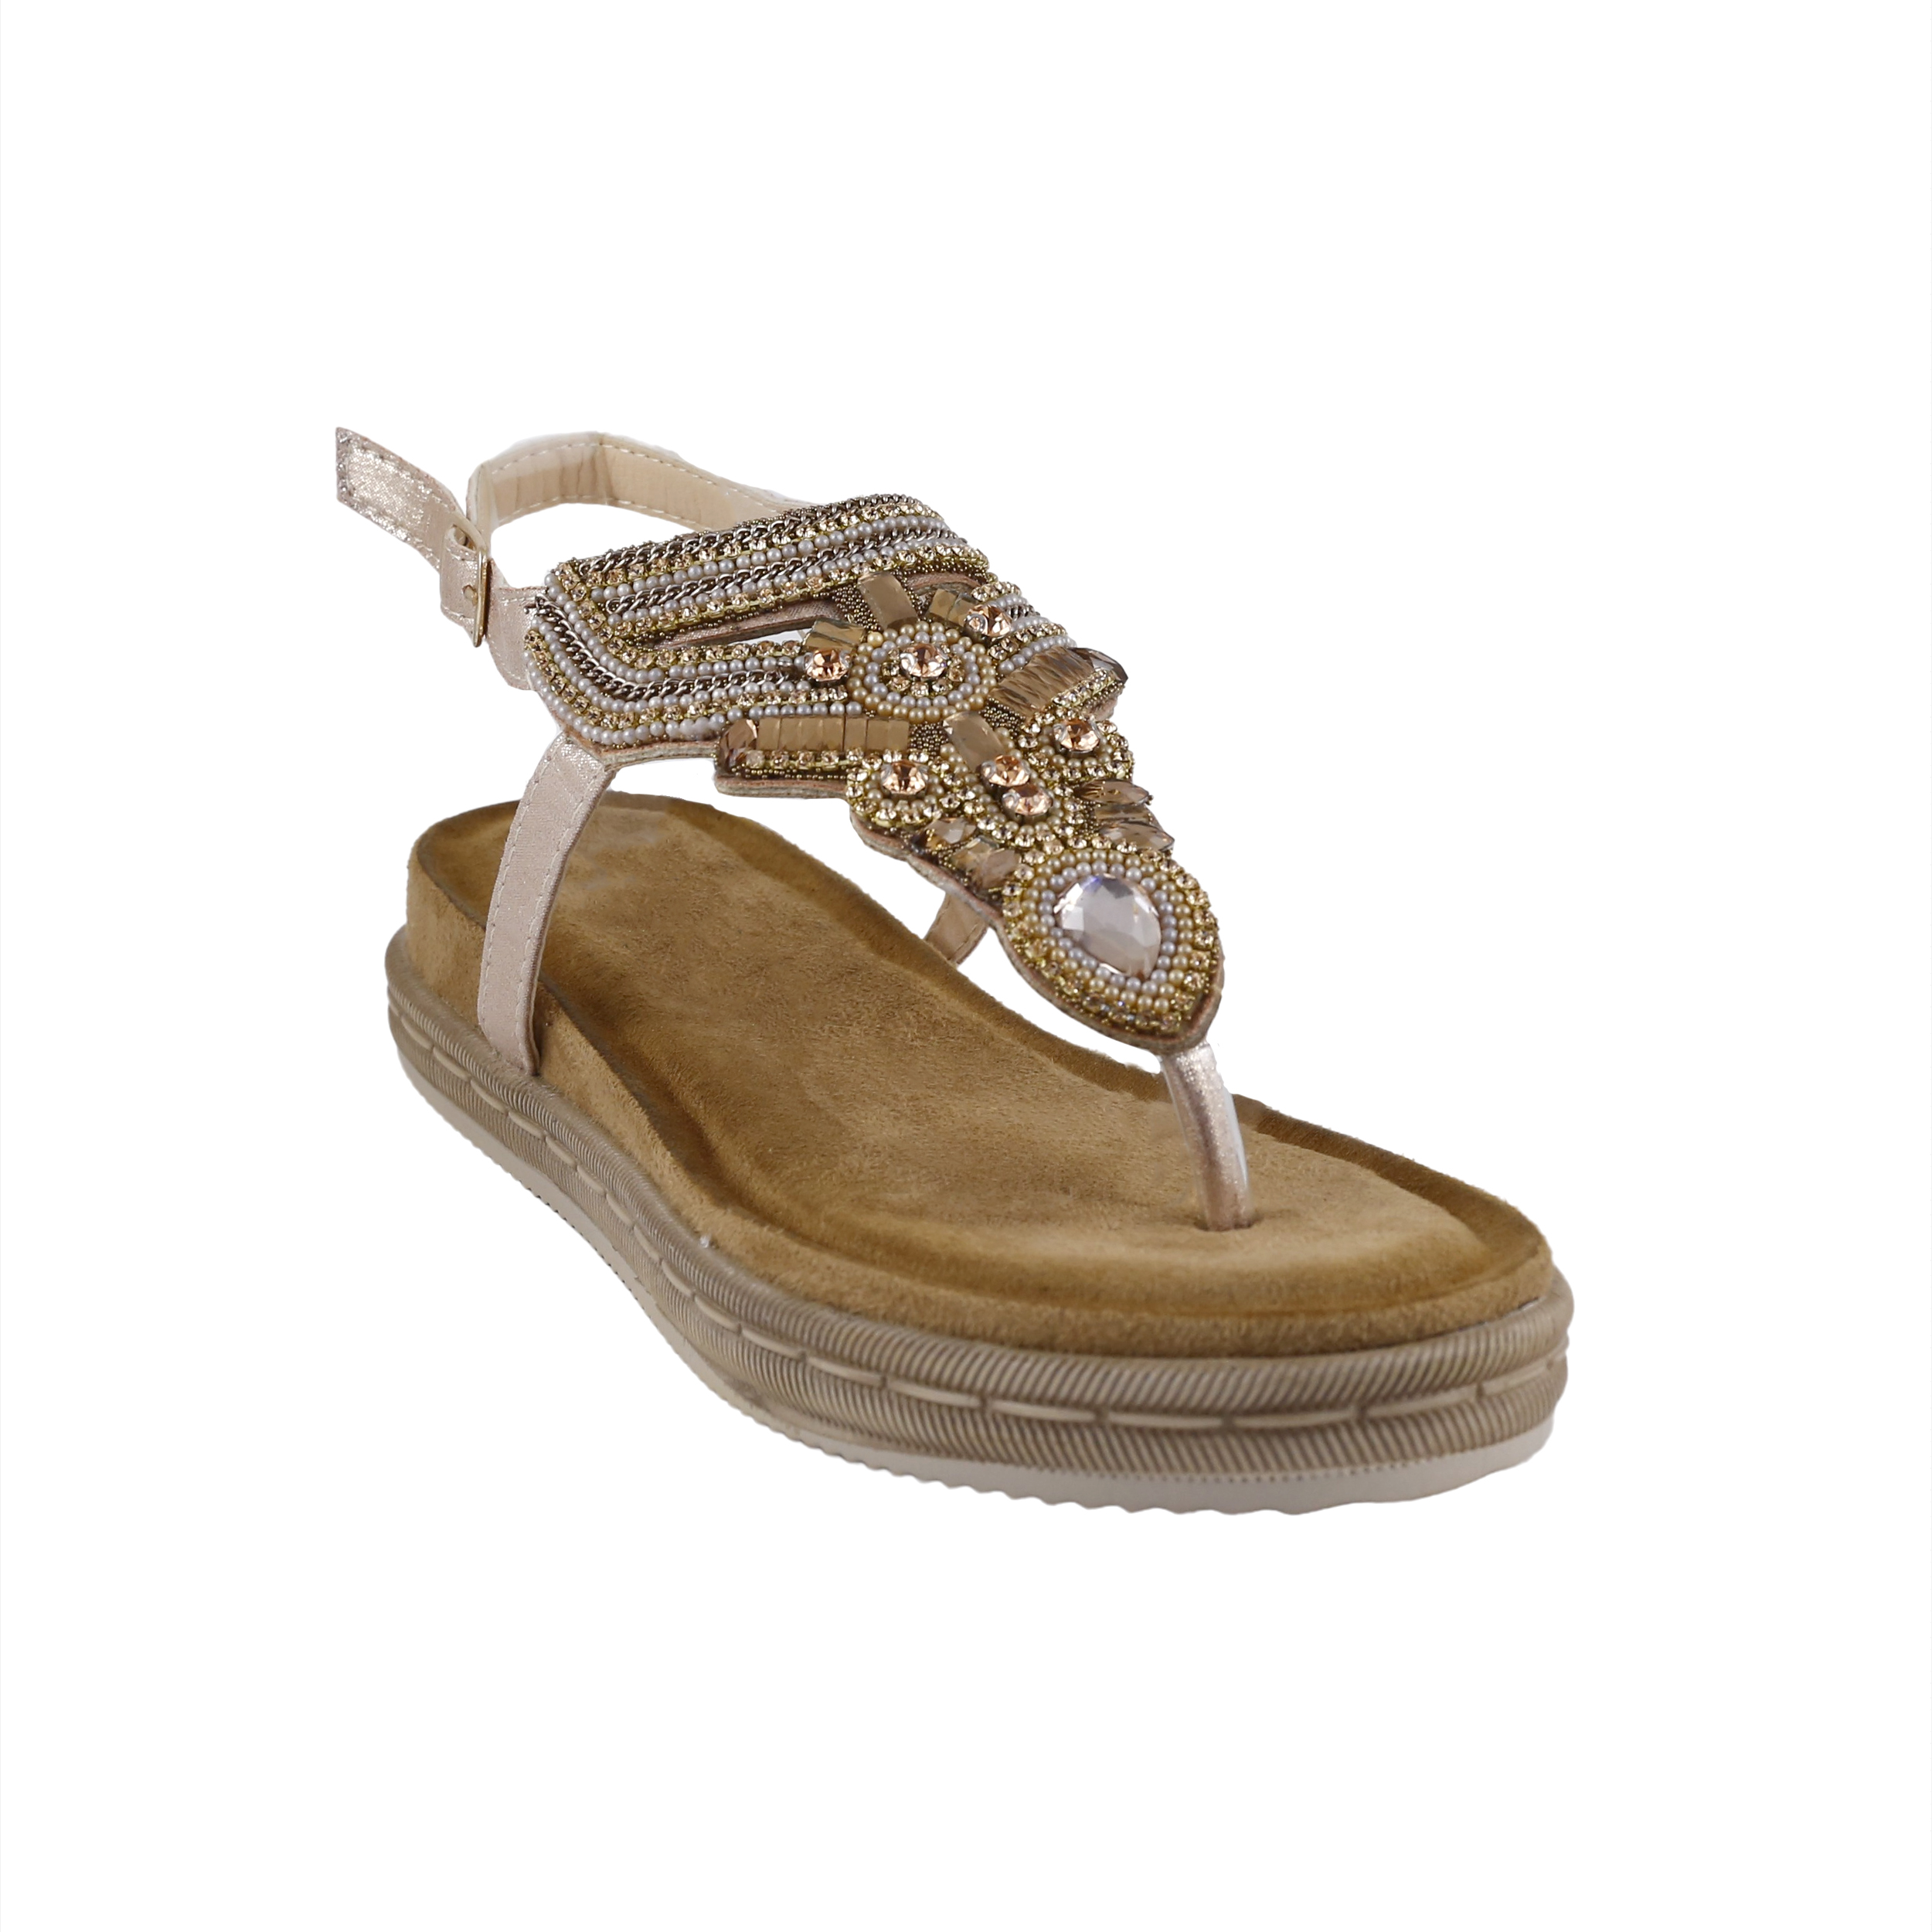 Woman Shoes Sandals - Flip Flops Gold sandal with stones and stras shine